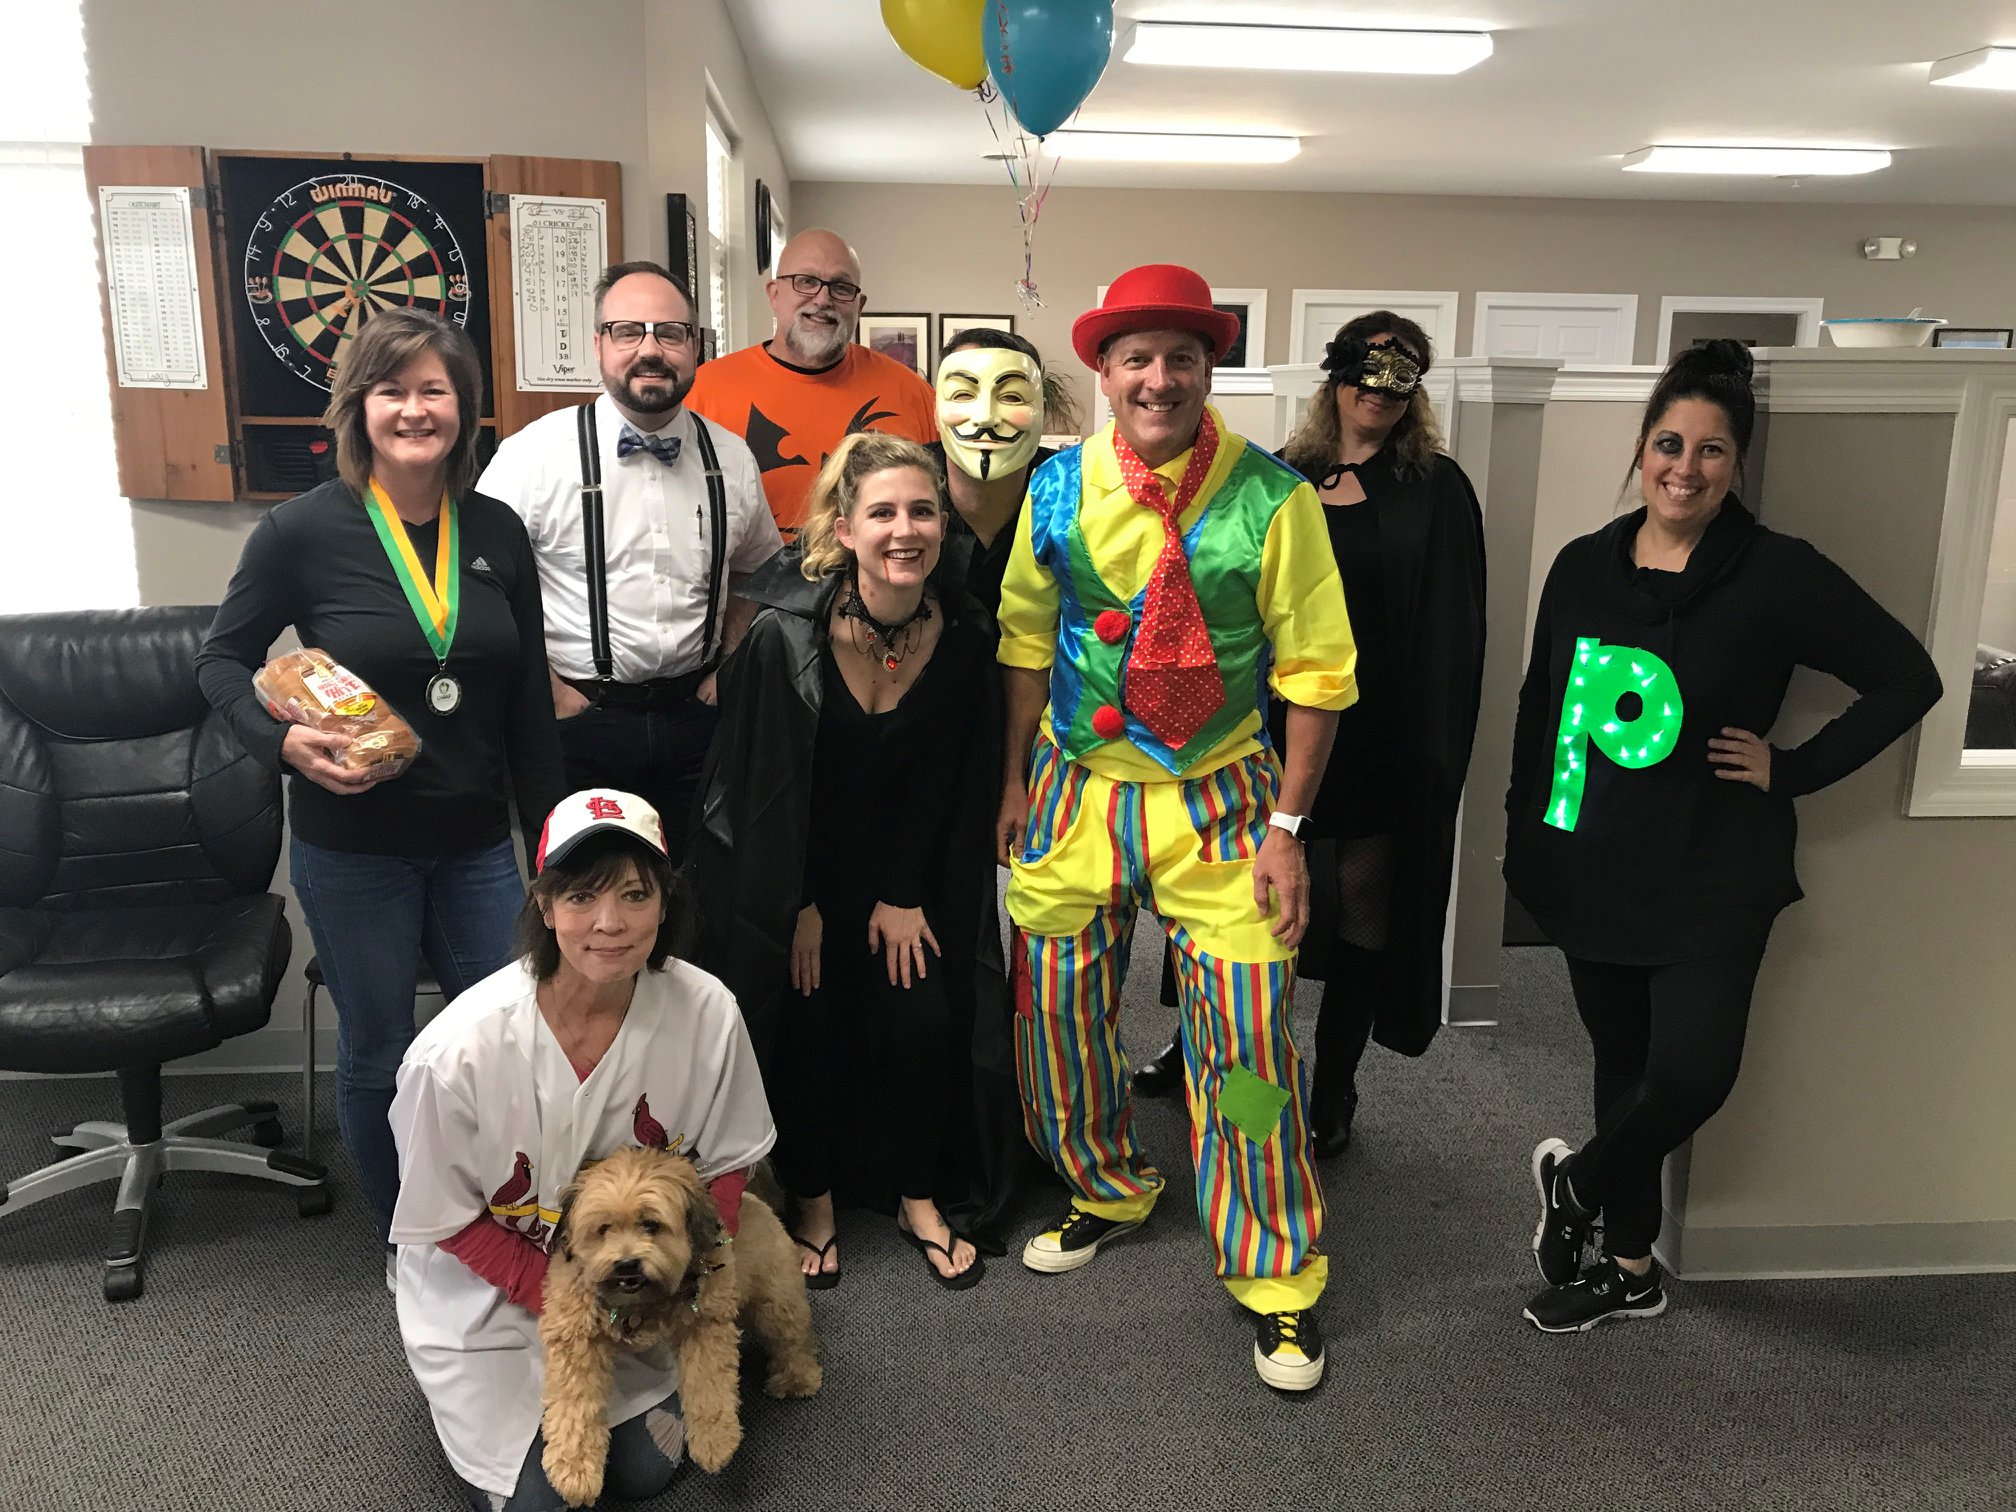 Group picture of the Stuckey & Company team dressed for Halloween